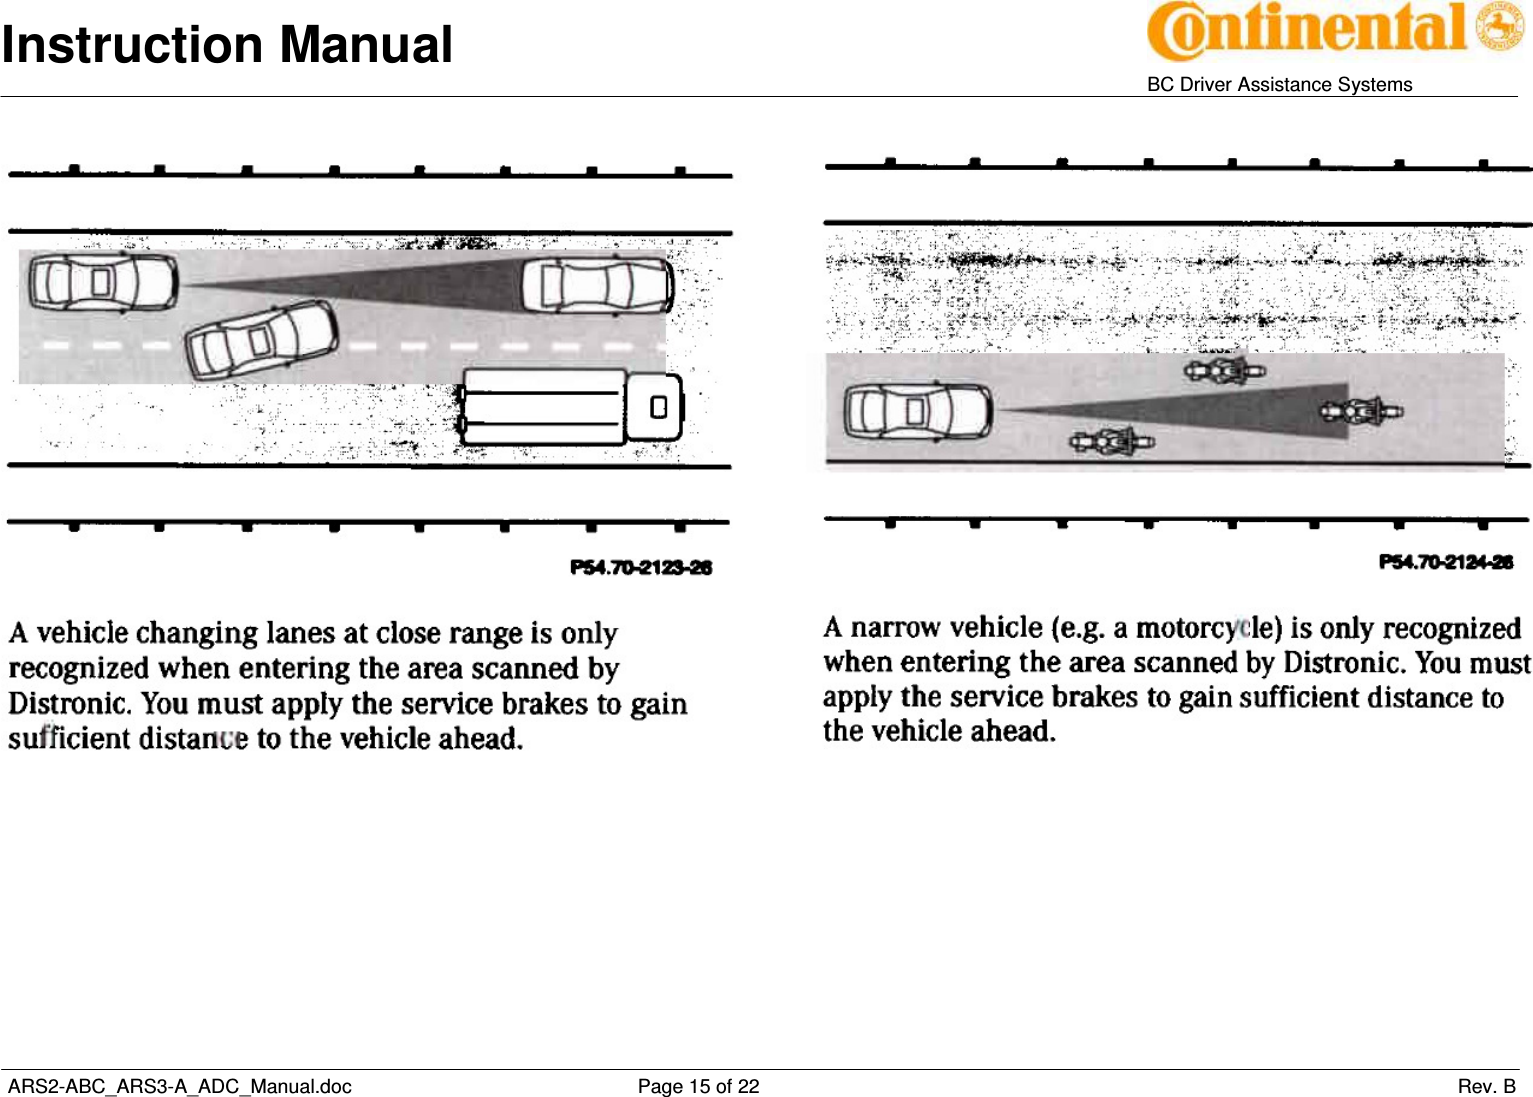 Instruction Manual   BC Driver Assistance Systems  ARS2-ABC_ARS3-A_ADC_Manual.doc     Page 15 of 22                 Rev. B   